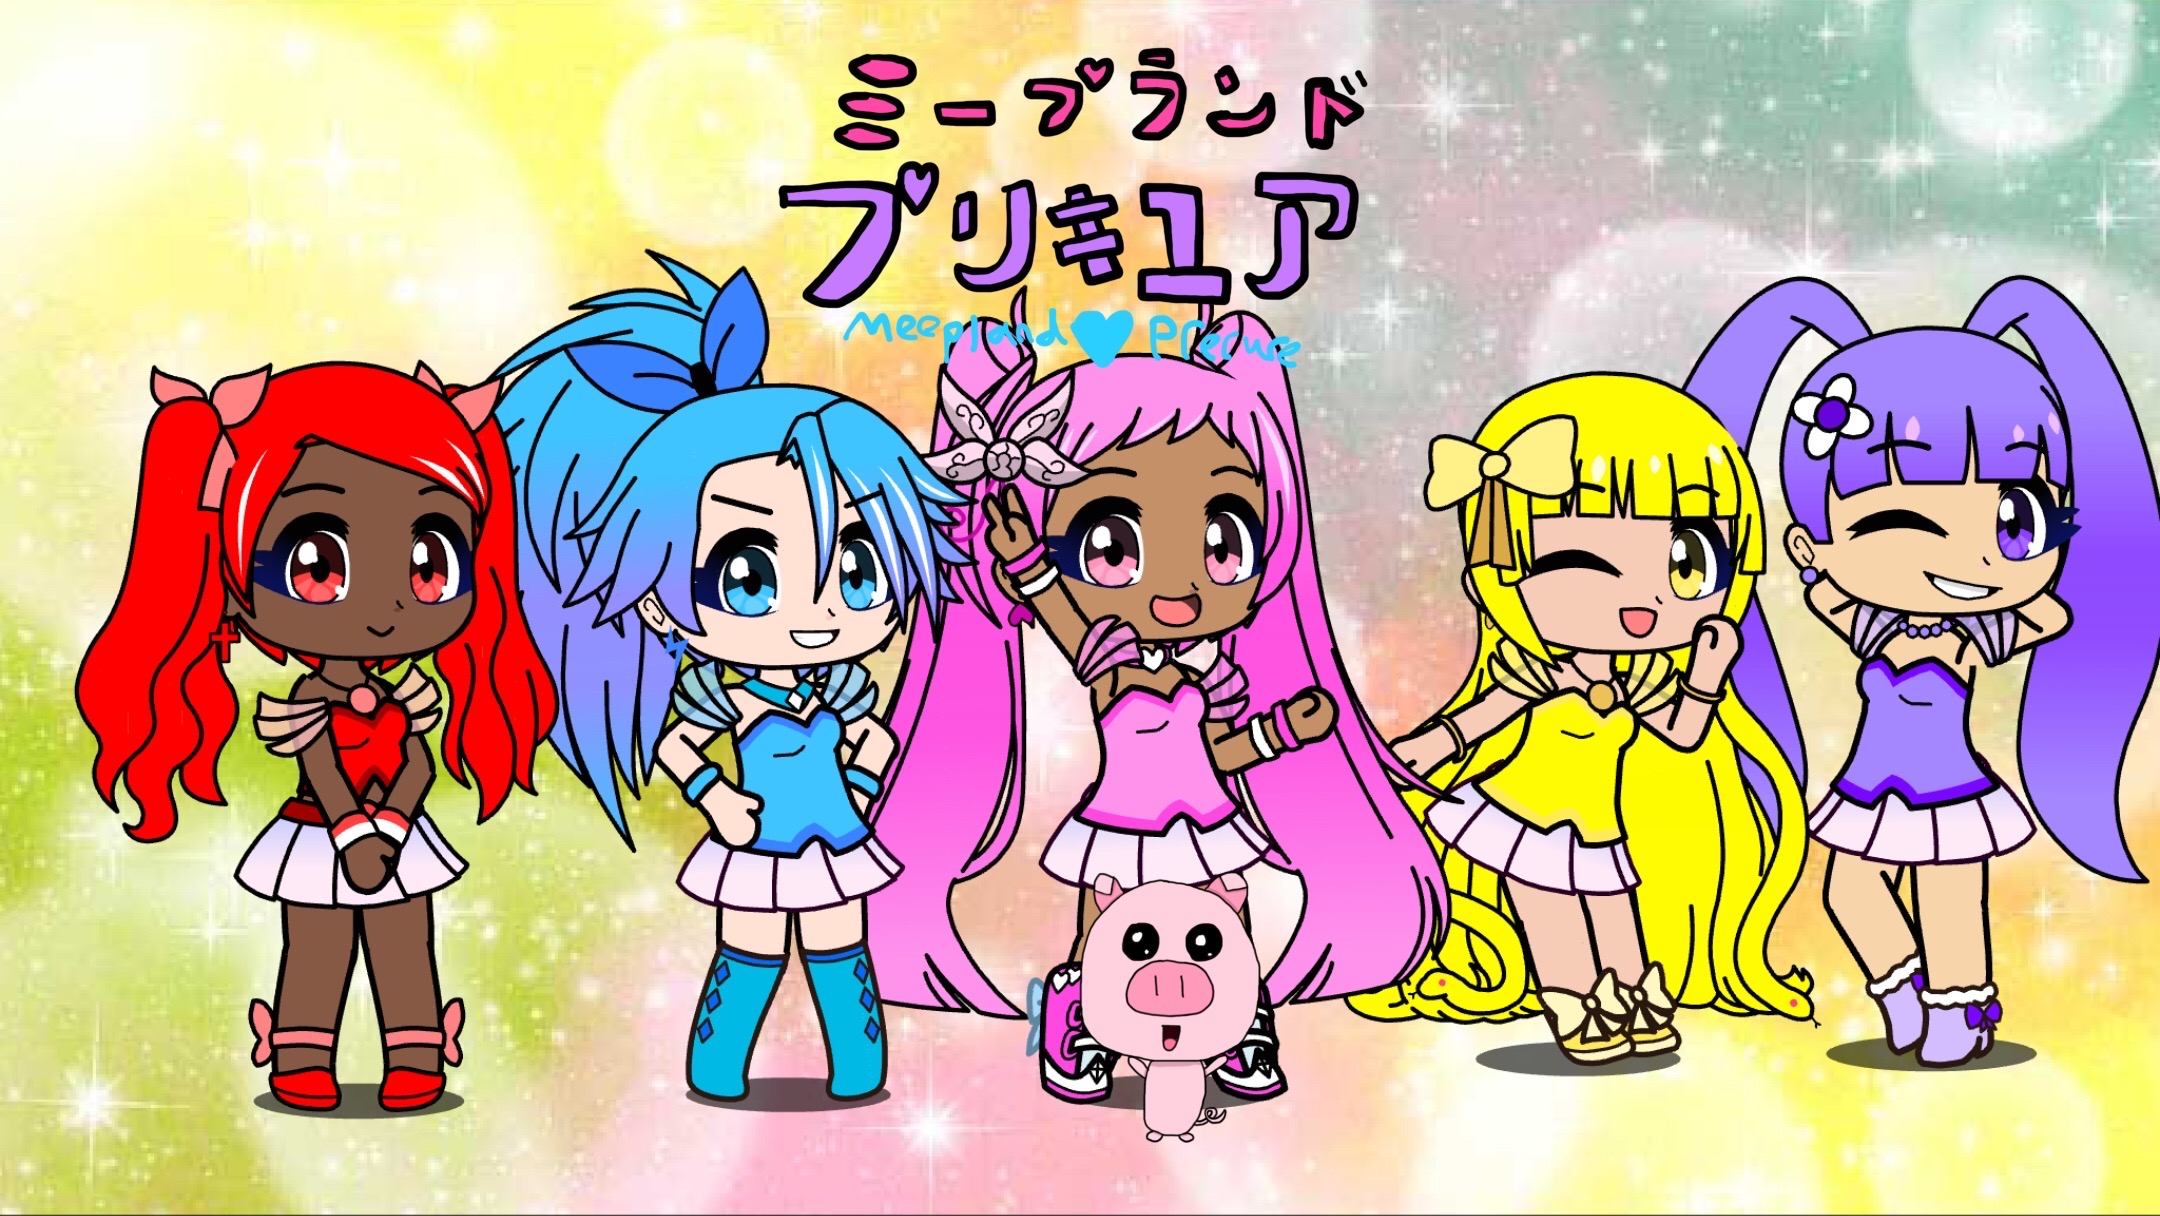 Meepland Precure (Fanmade Precure Series) by wreny2001 on DeviantArt